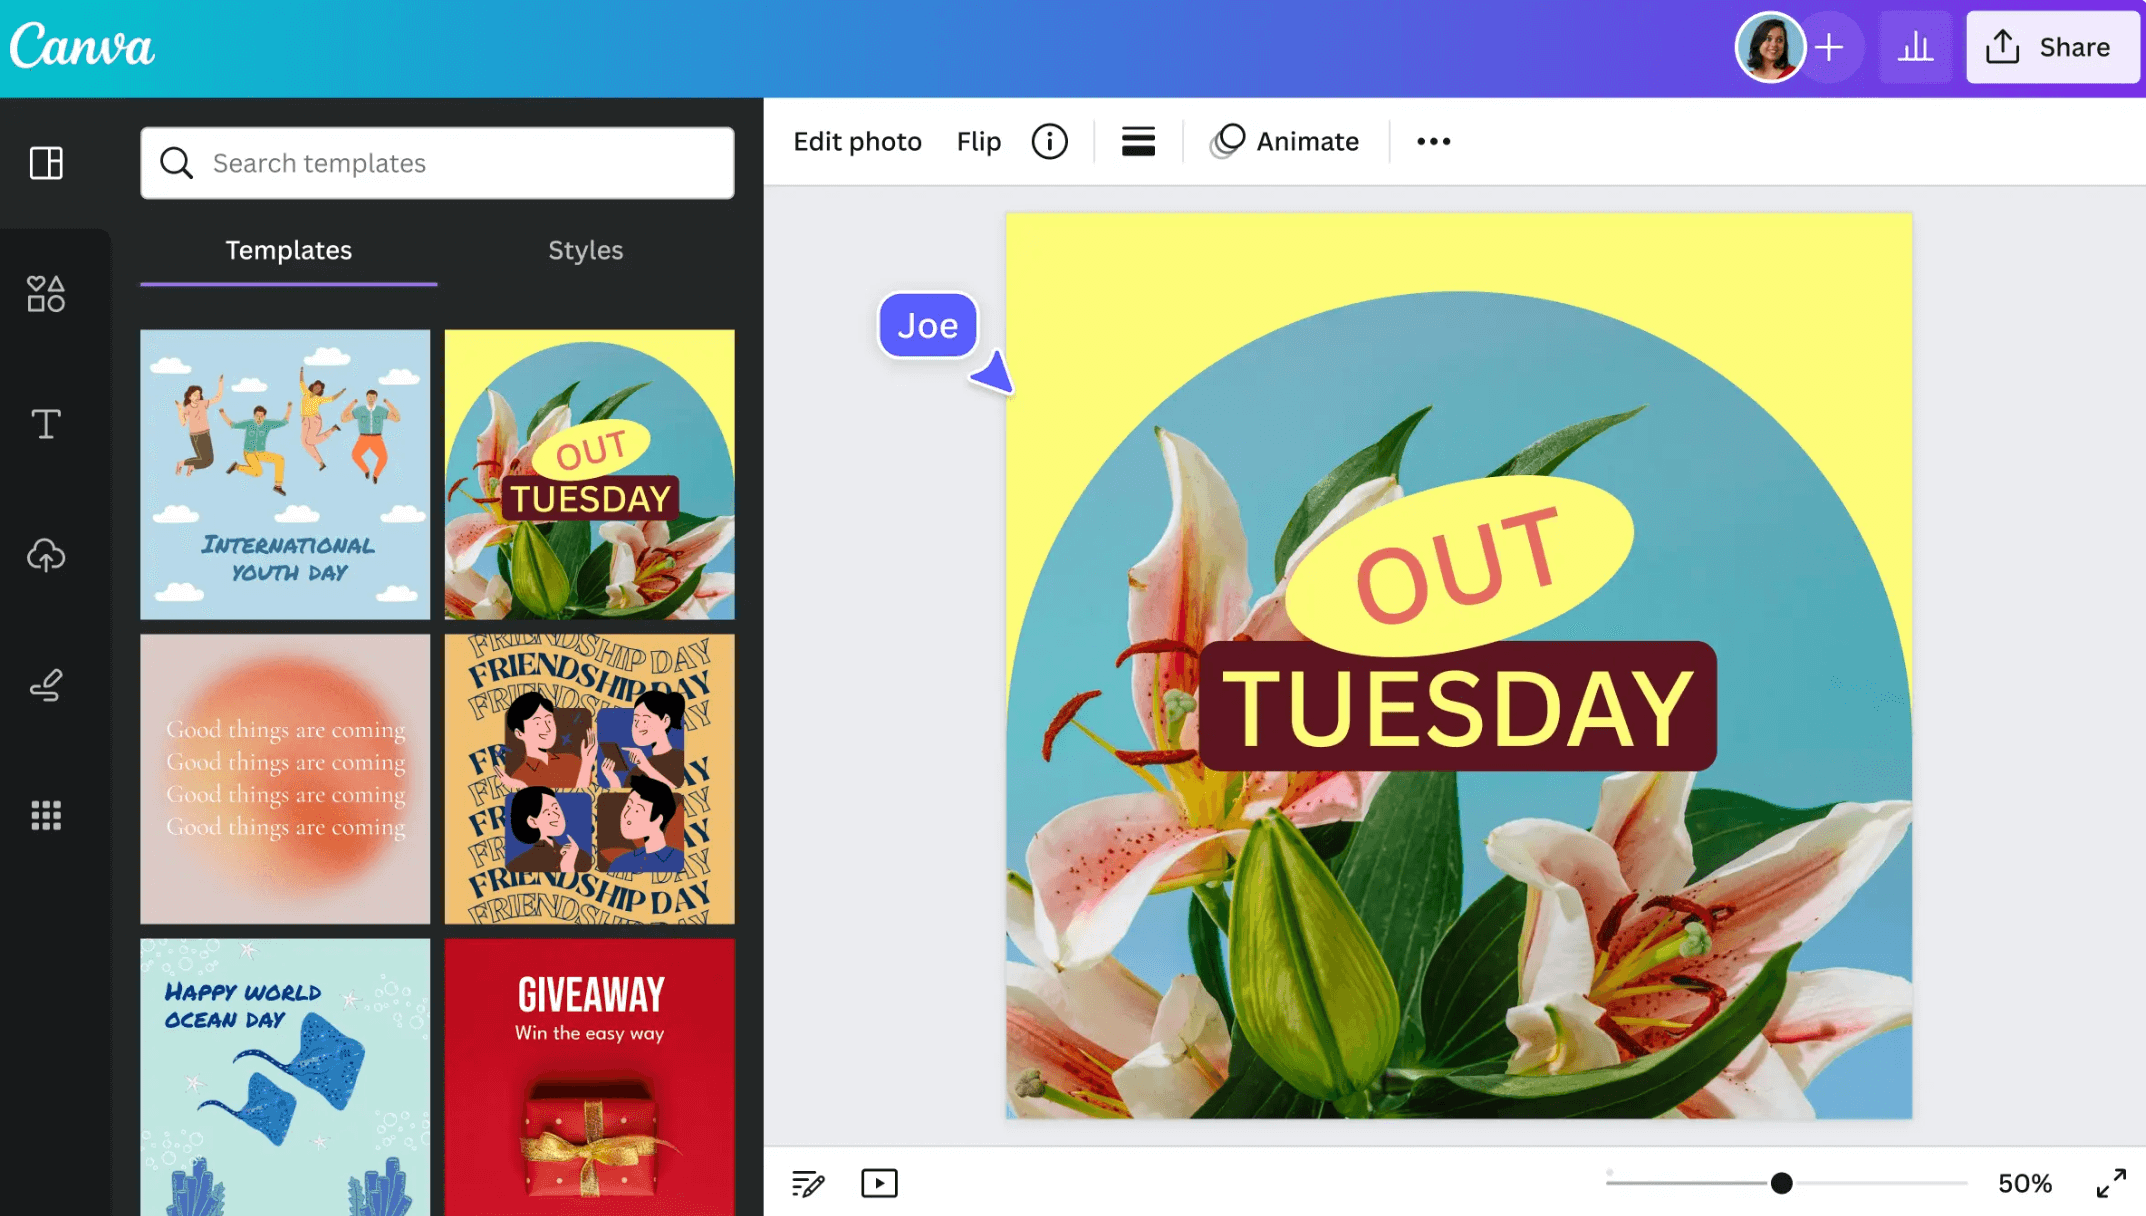 Canva interface displaying a variety of customizable design templates for social media posts.